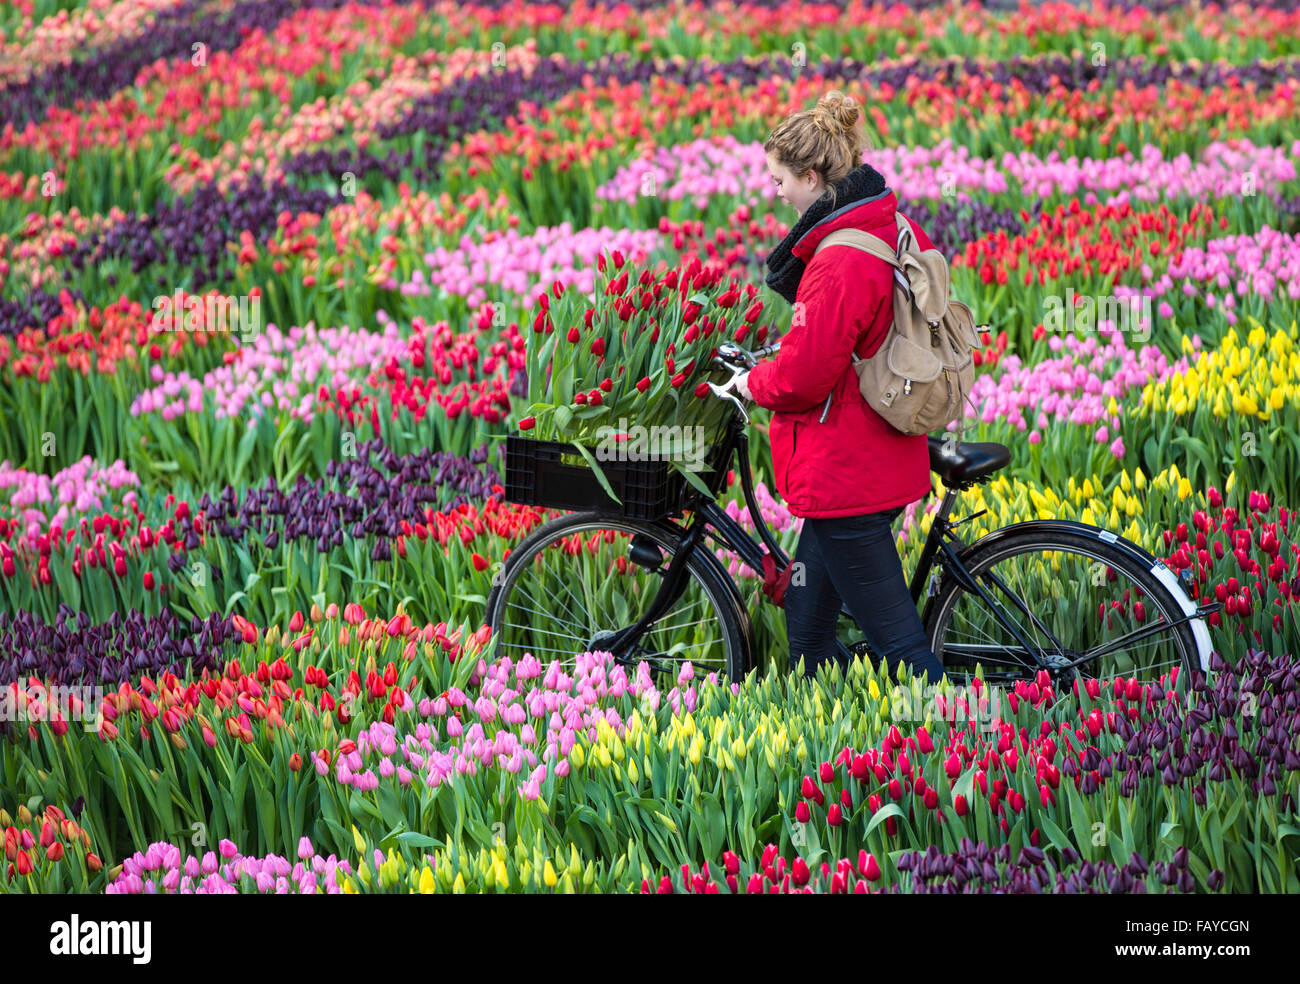 Netherlands, Amsterdam, Start tulip season at Dam Square. People can pick the tulips for free. National Tulip Day. Girl bicycle Stock Photo